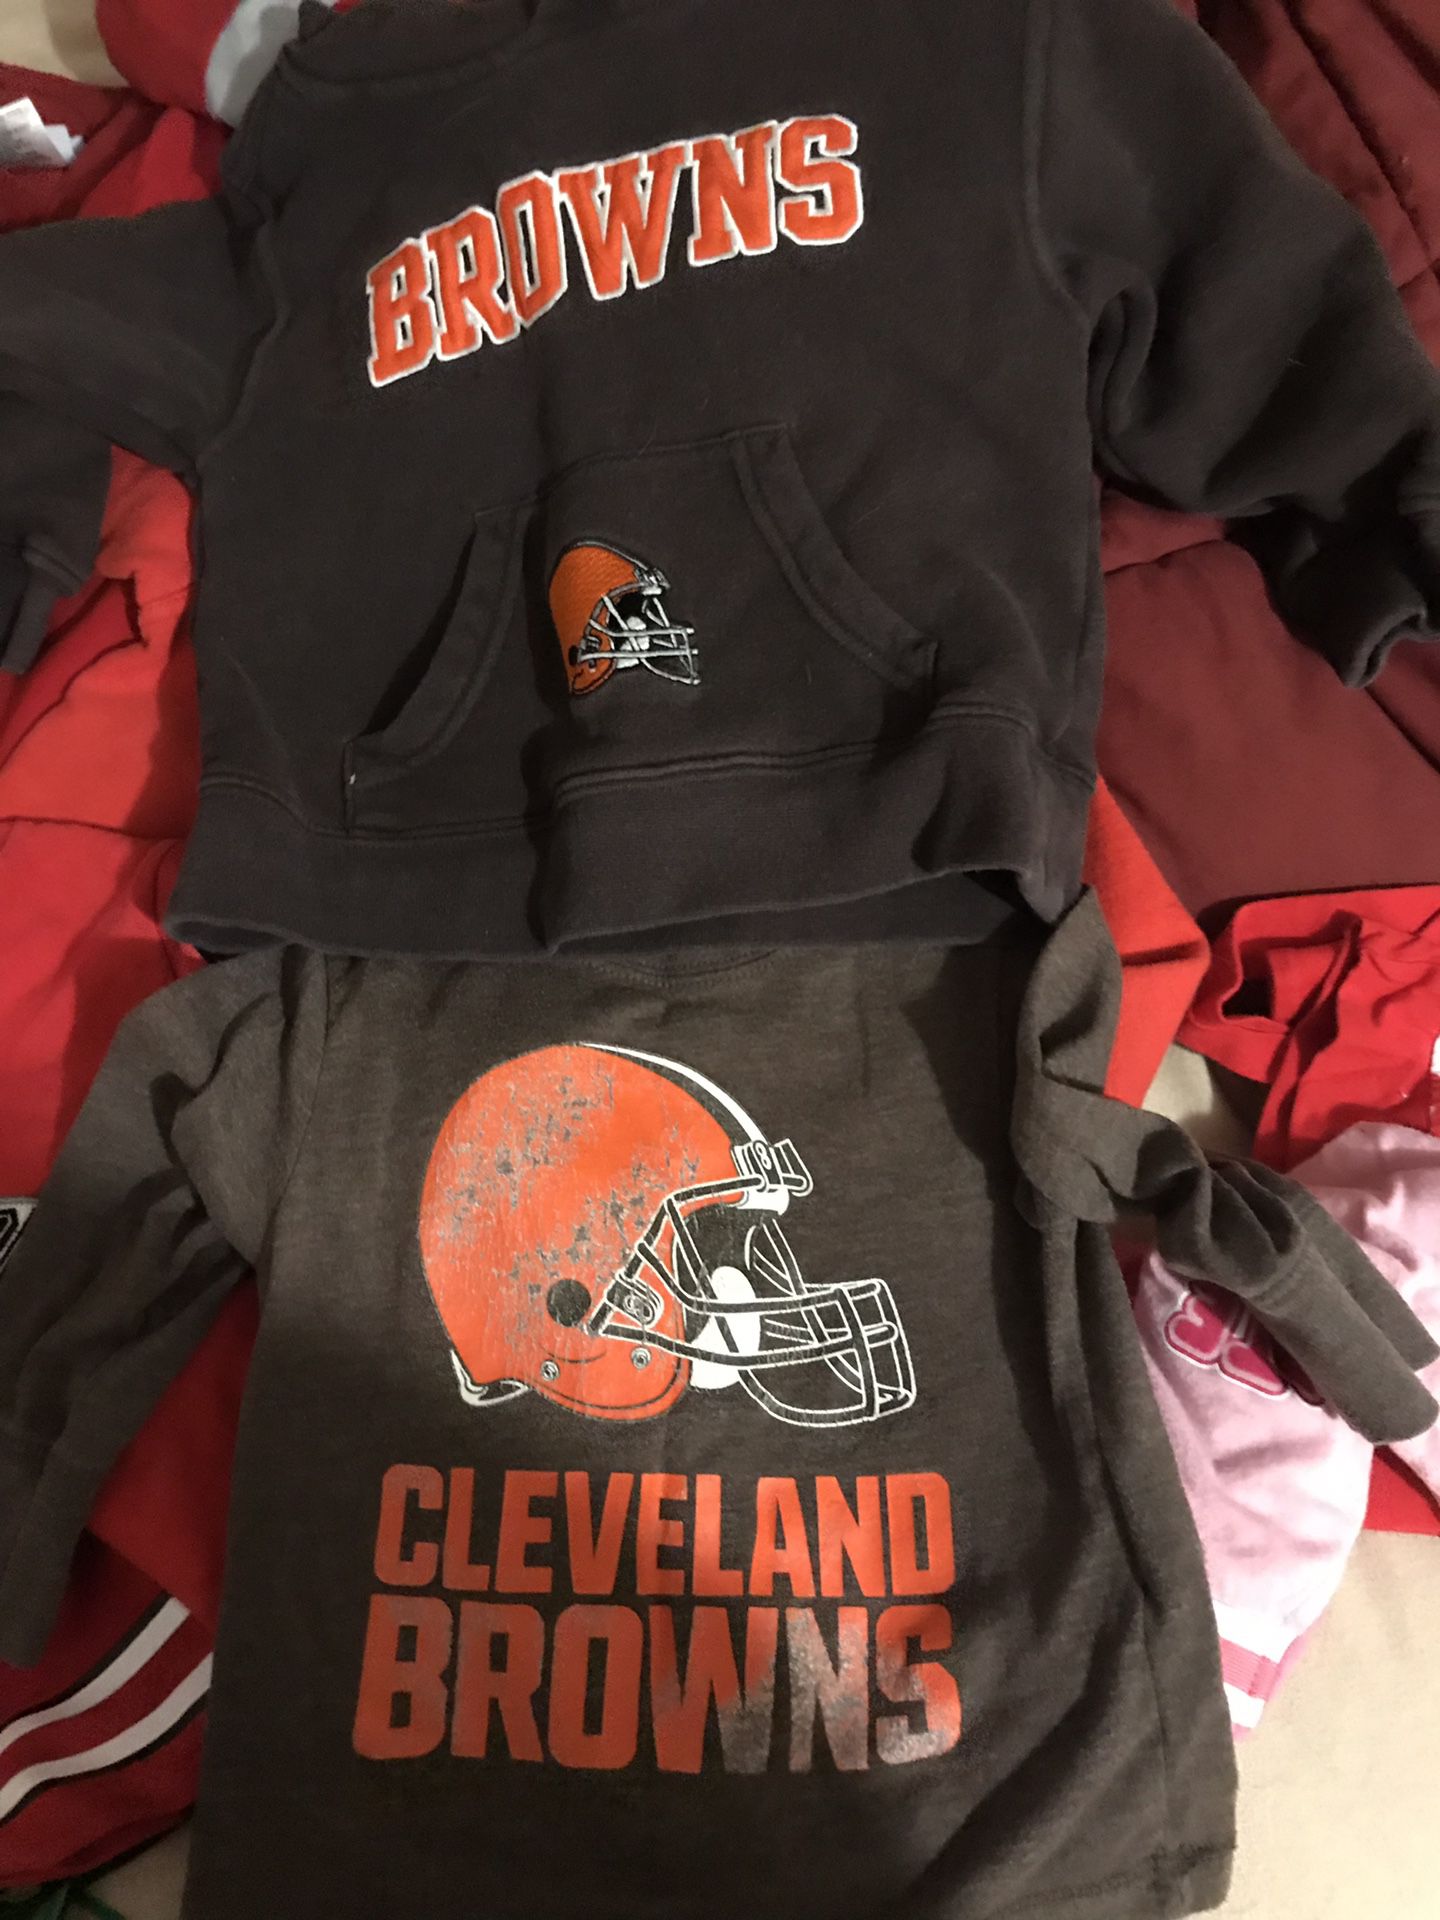 Cleveland Browns 12-18 month Long sleeve shirt and 2 T Hoodie